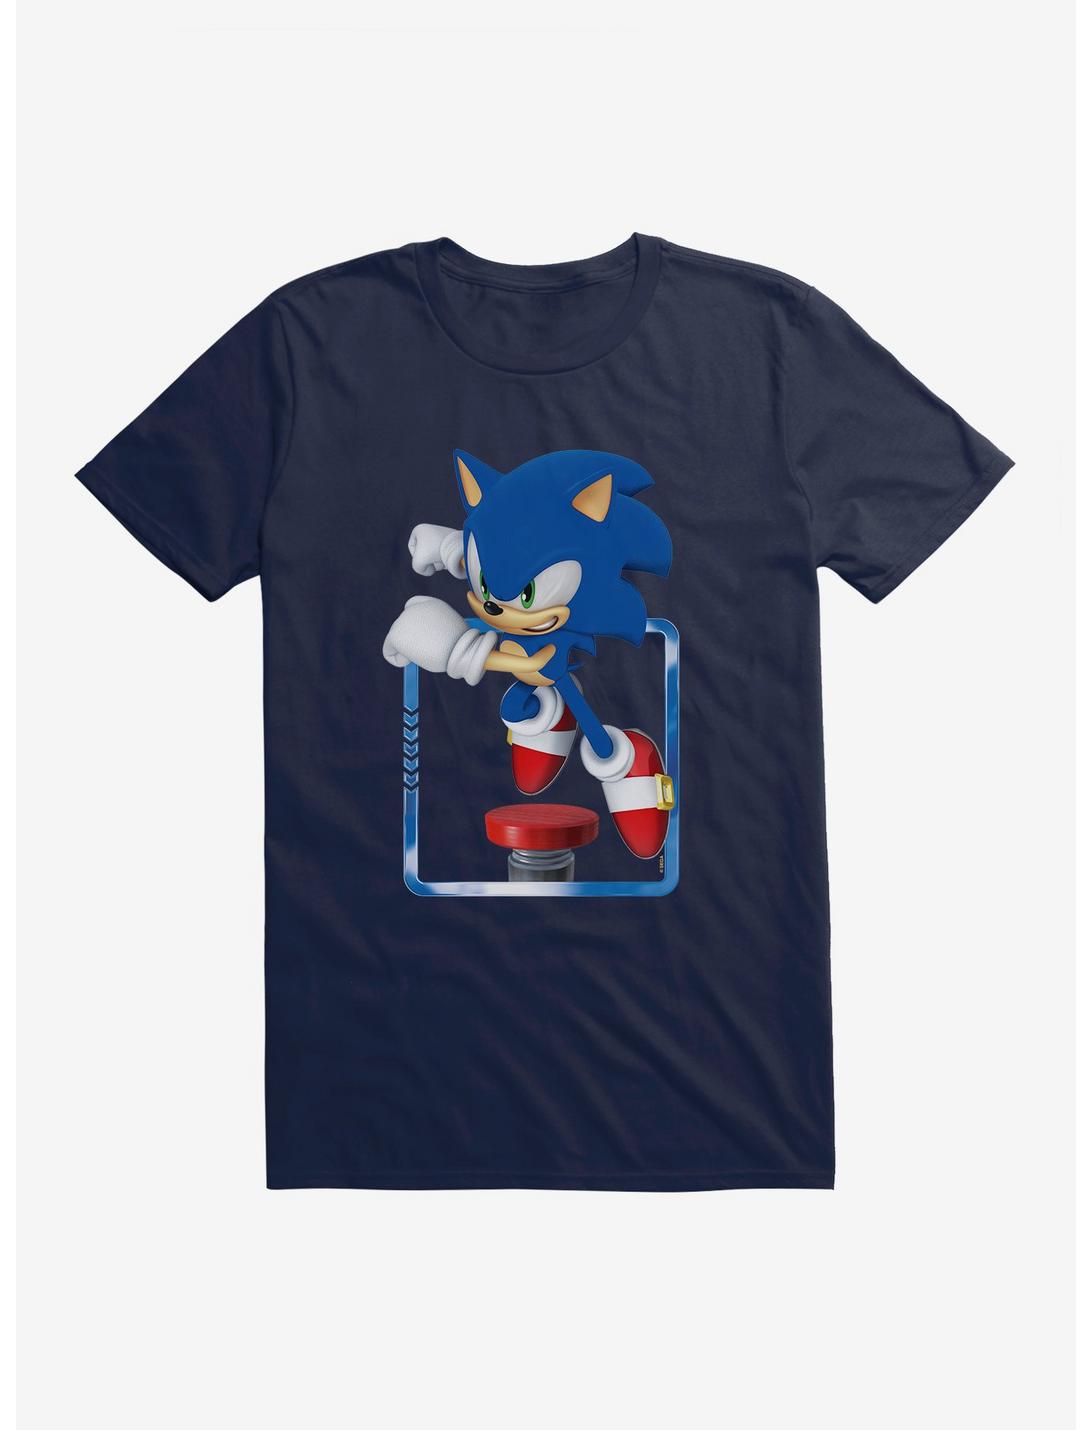 Sonic The Hedgehog 3-D Sonic Spring Bounce T-Shirt, MIDNIGHT NAVY, hi-res